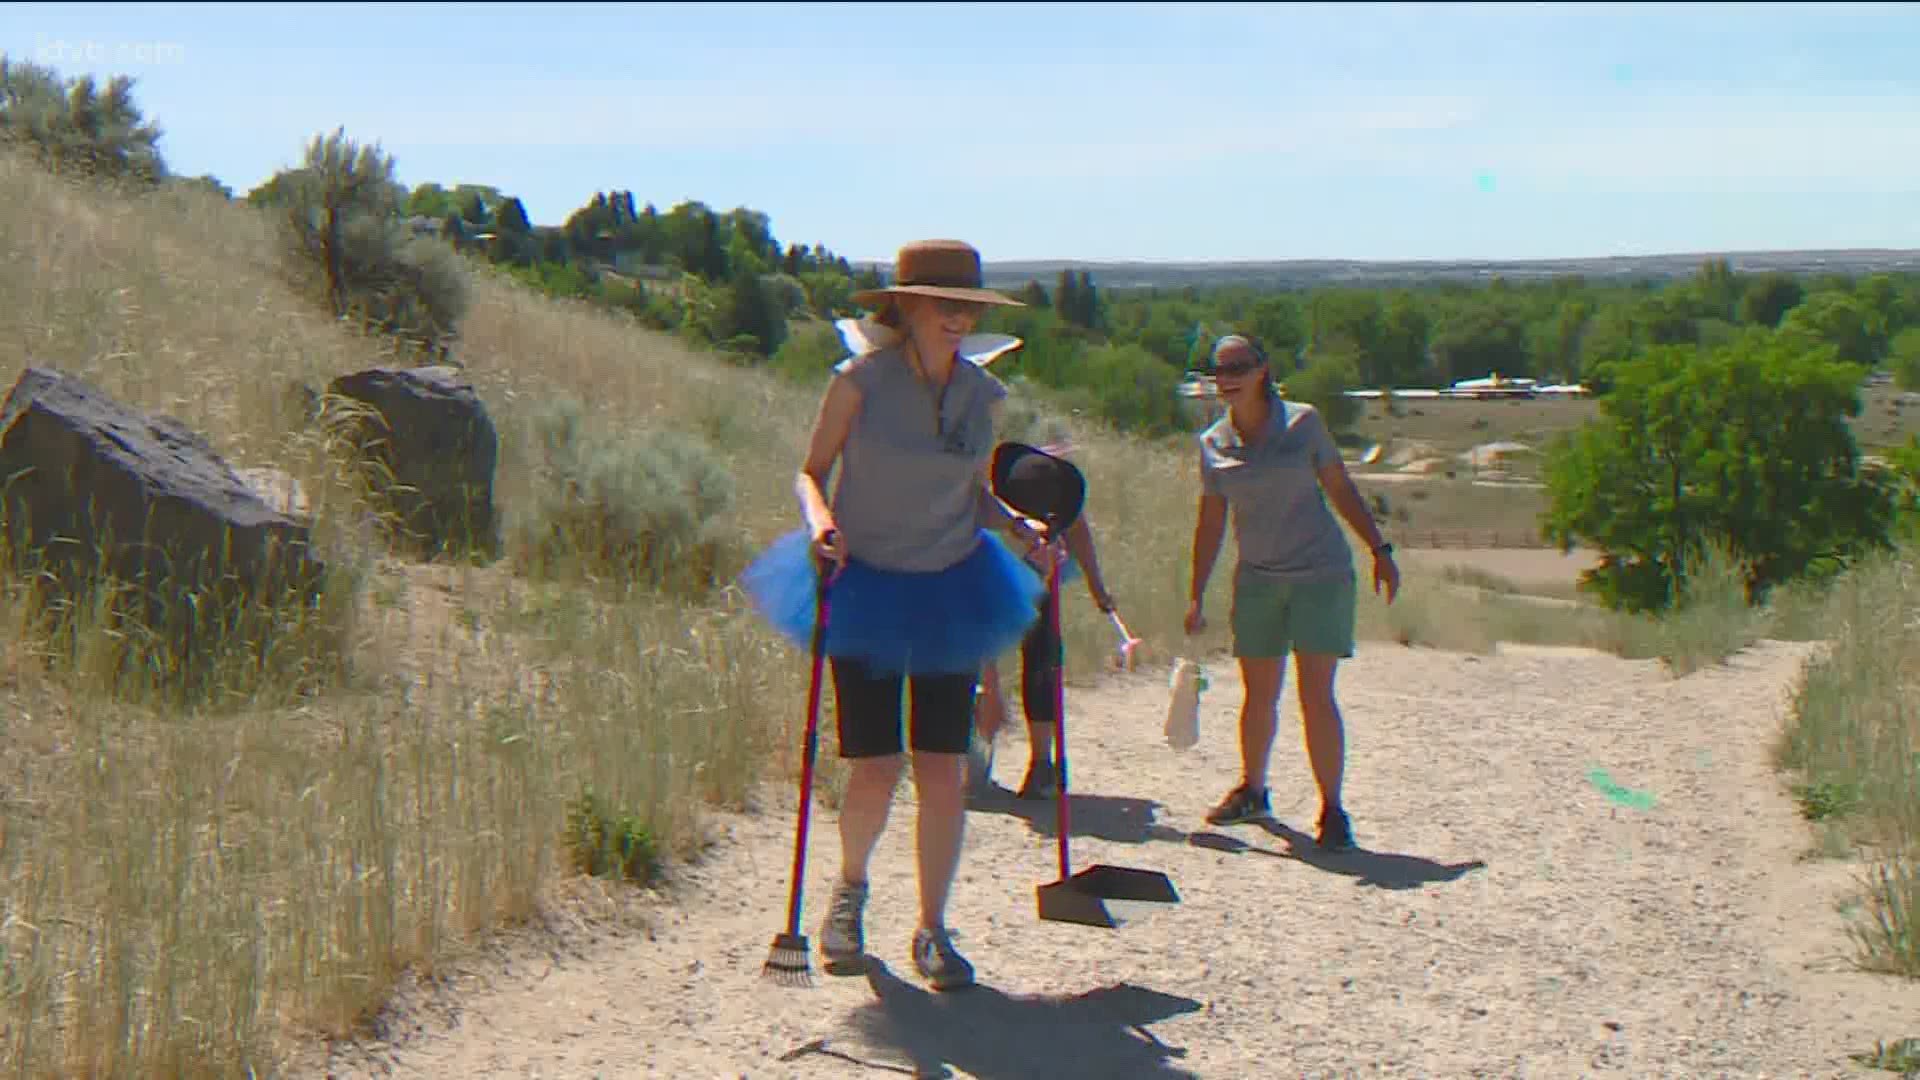 The public was invited to grab a poop bag and clean up around the Foothills.